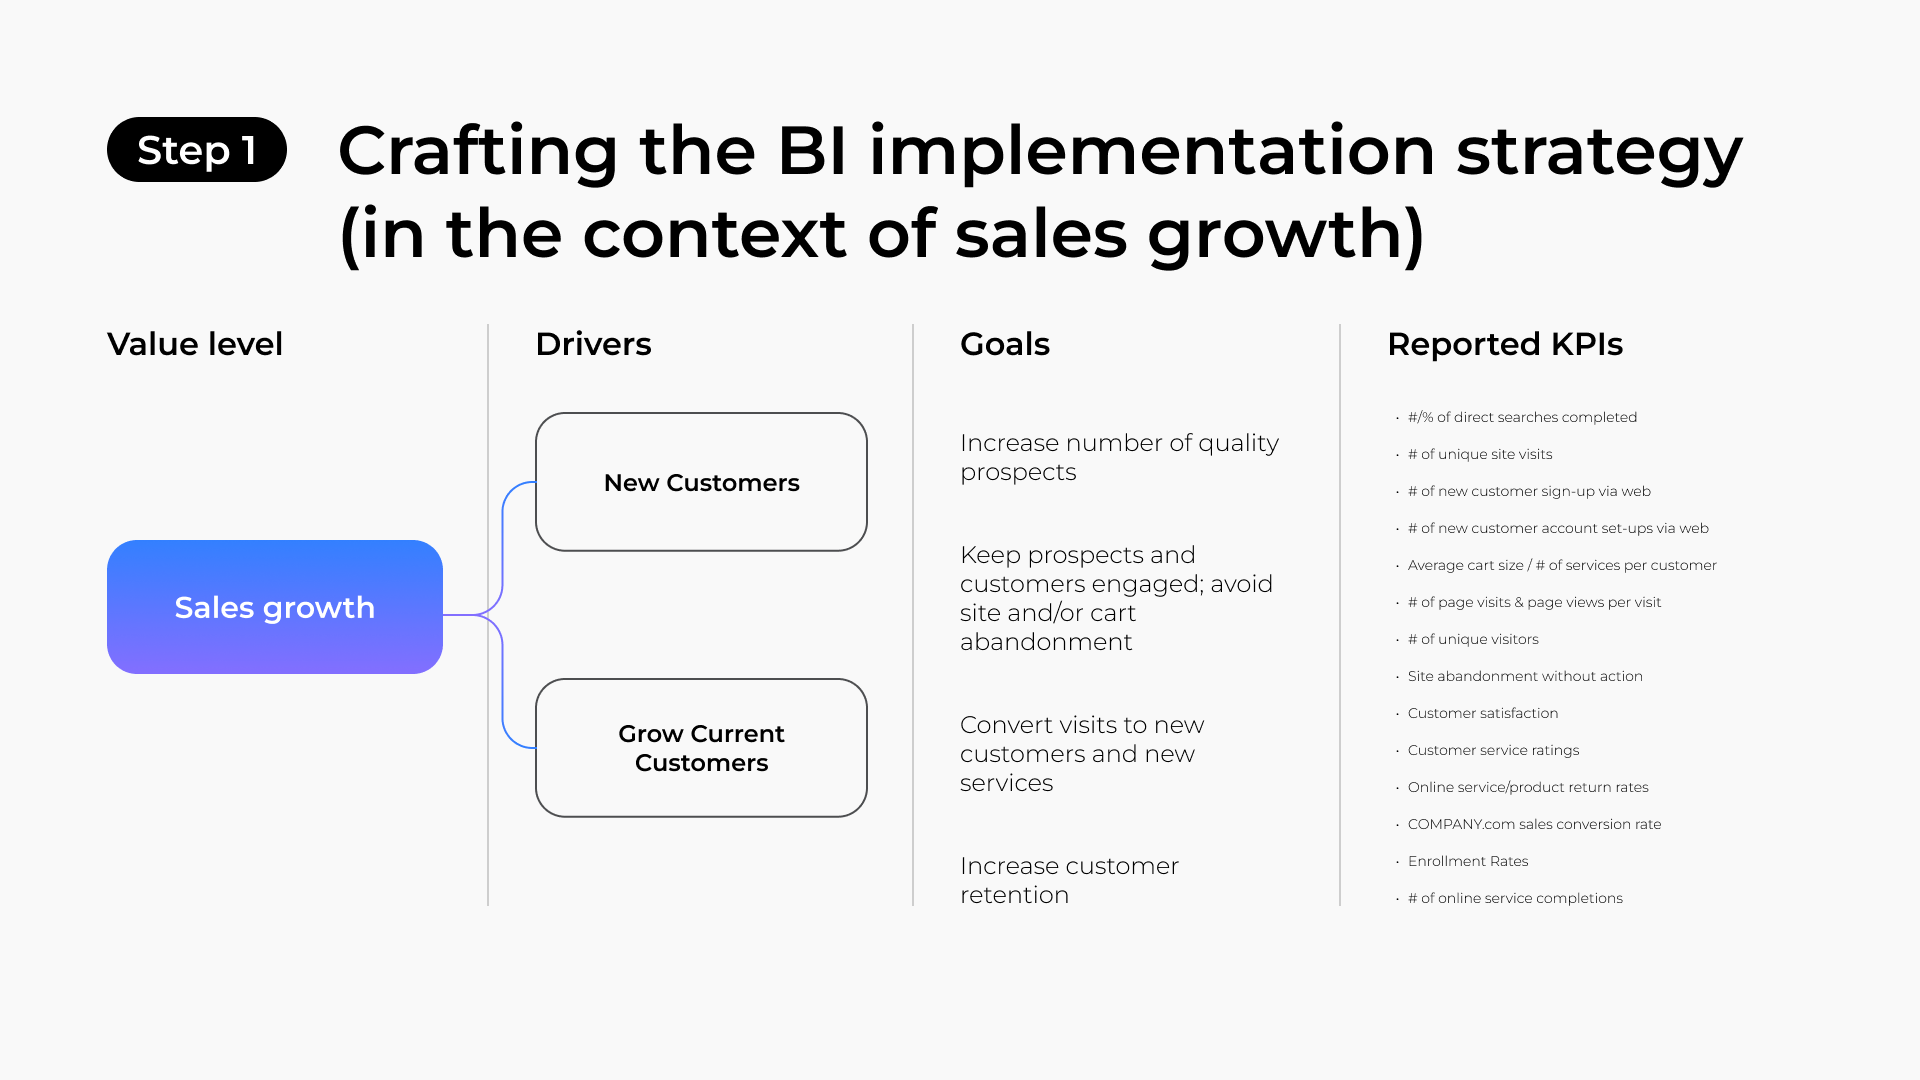 Crafting the BI implementation strategy